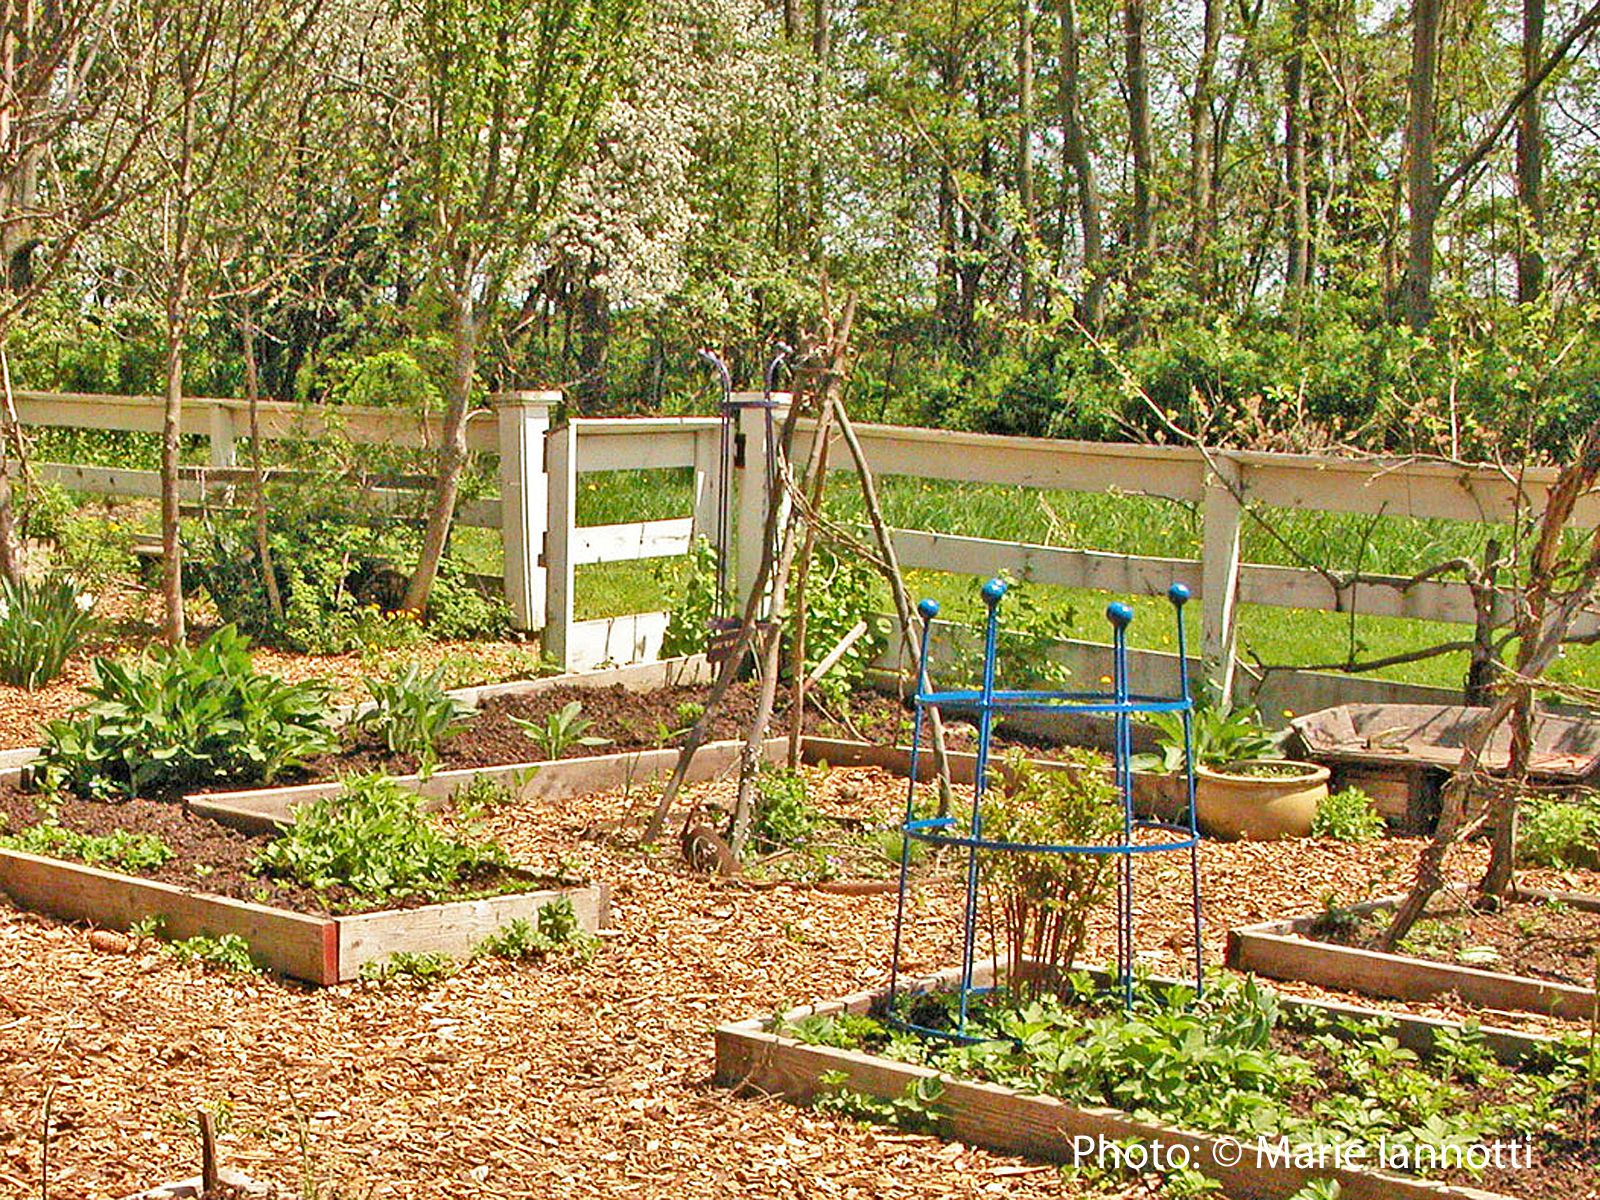 What Can You Grow in a Raised Bed Garden?